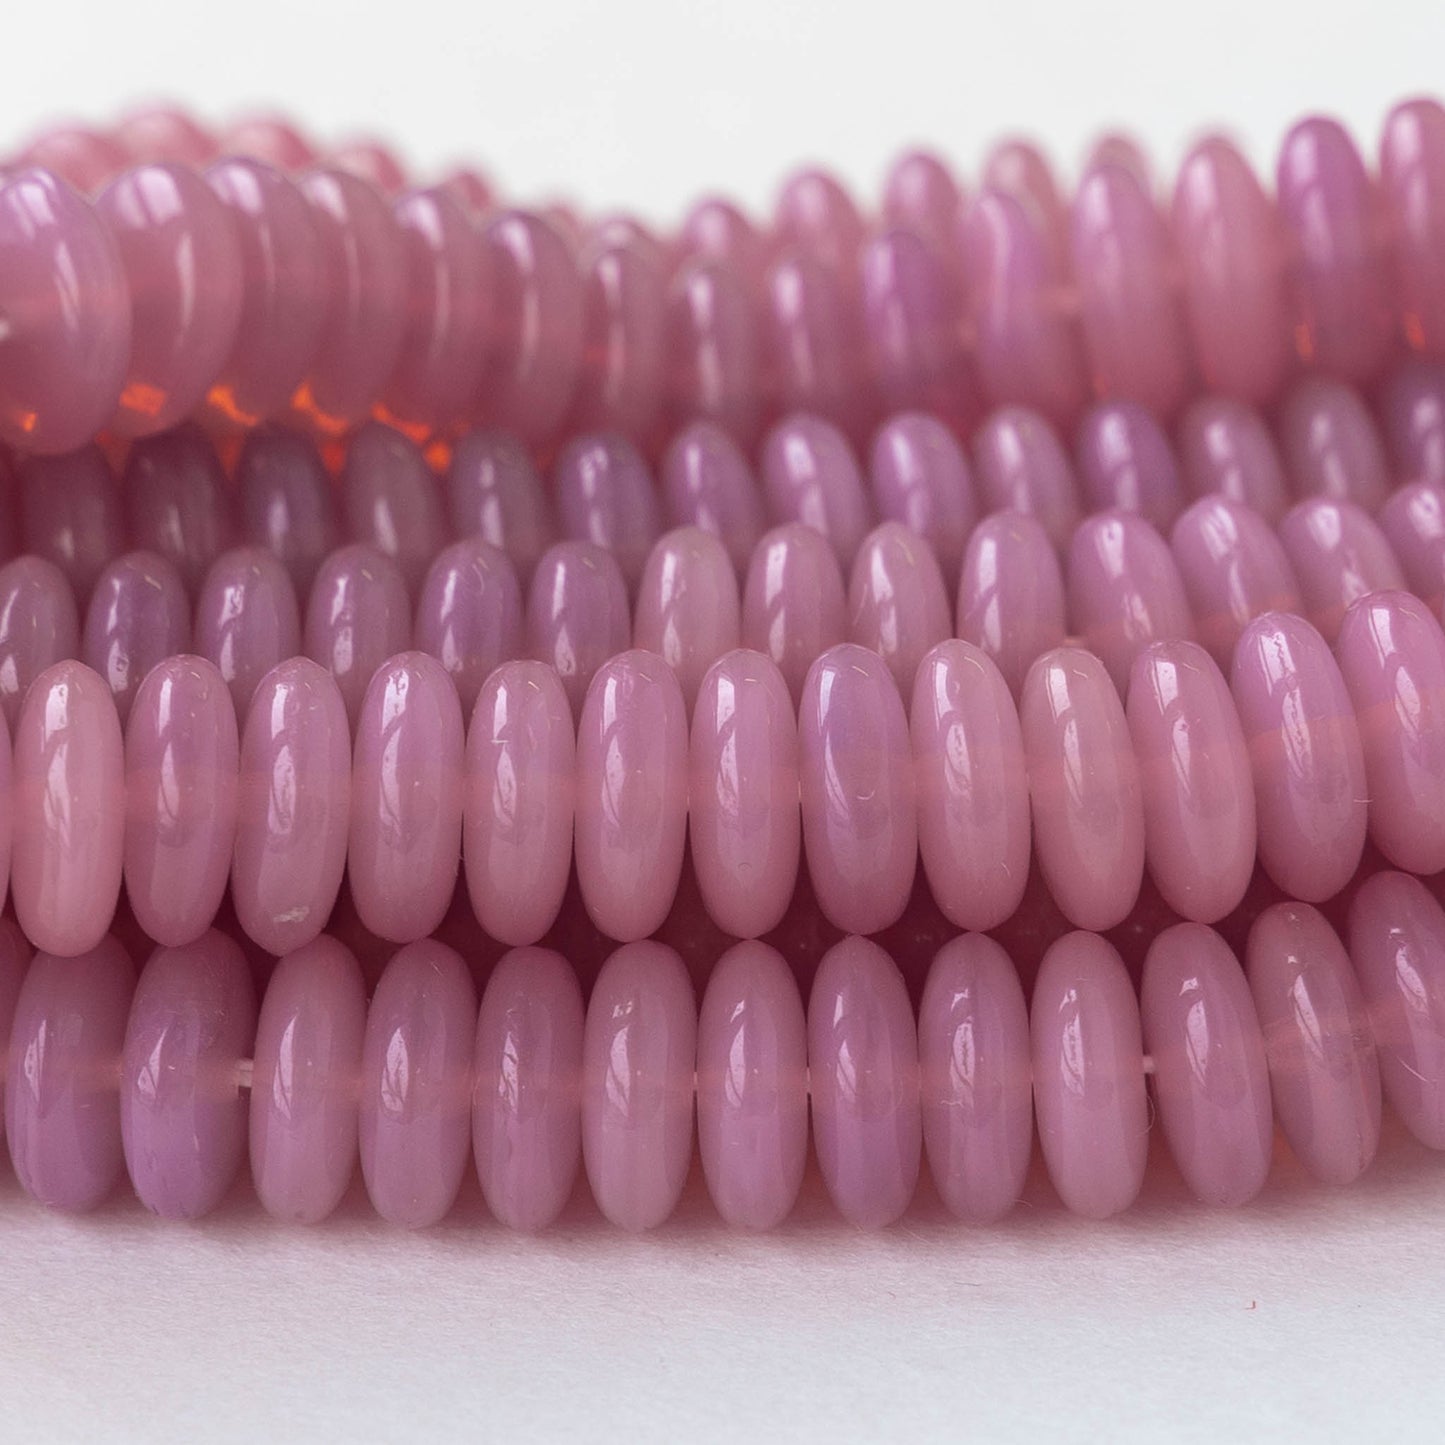 8mm Glass Rondelle Beads - Opaline Pink Rose - 30 Beads